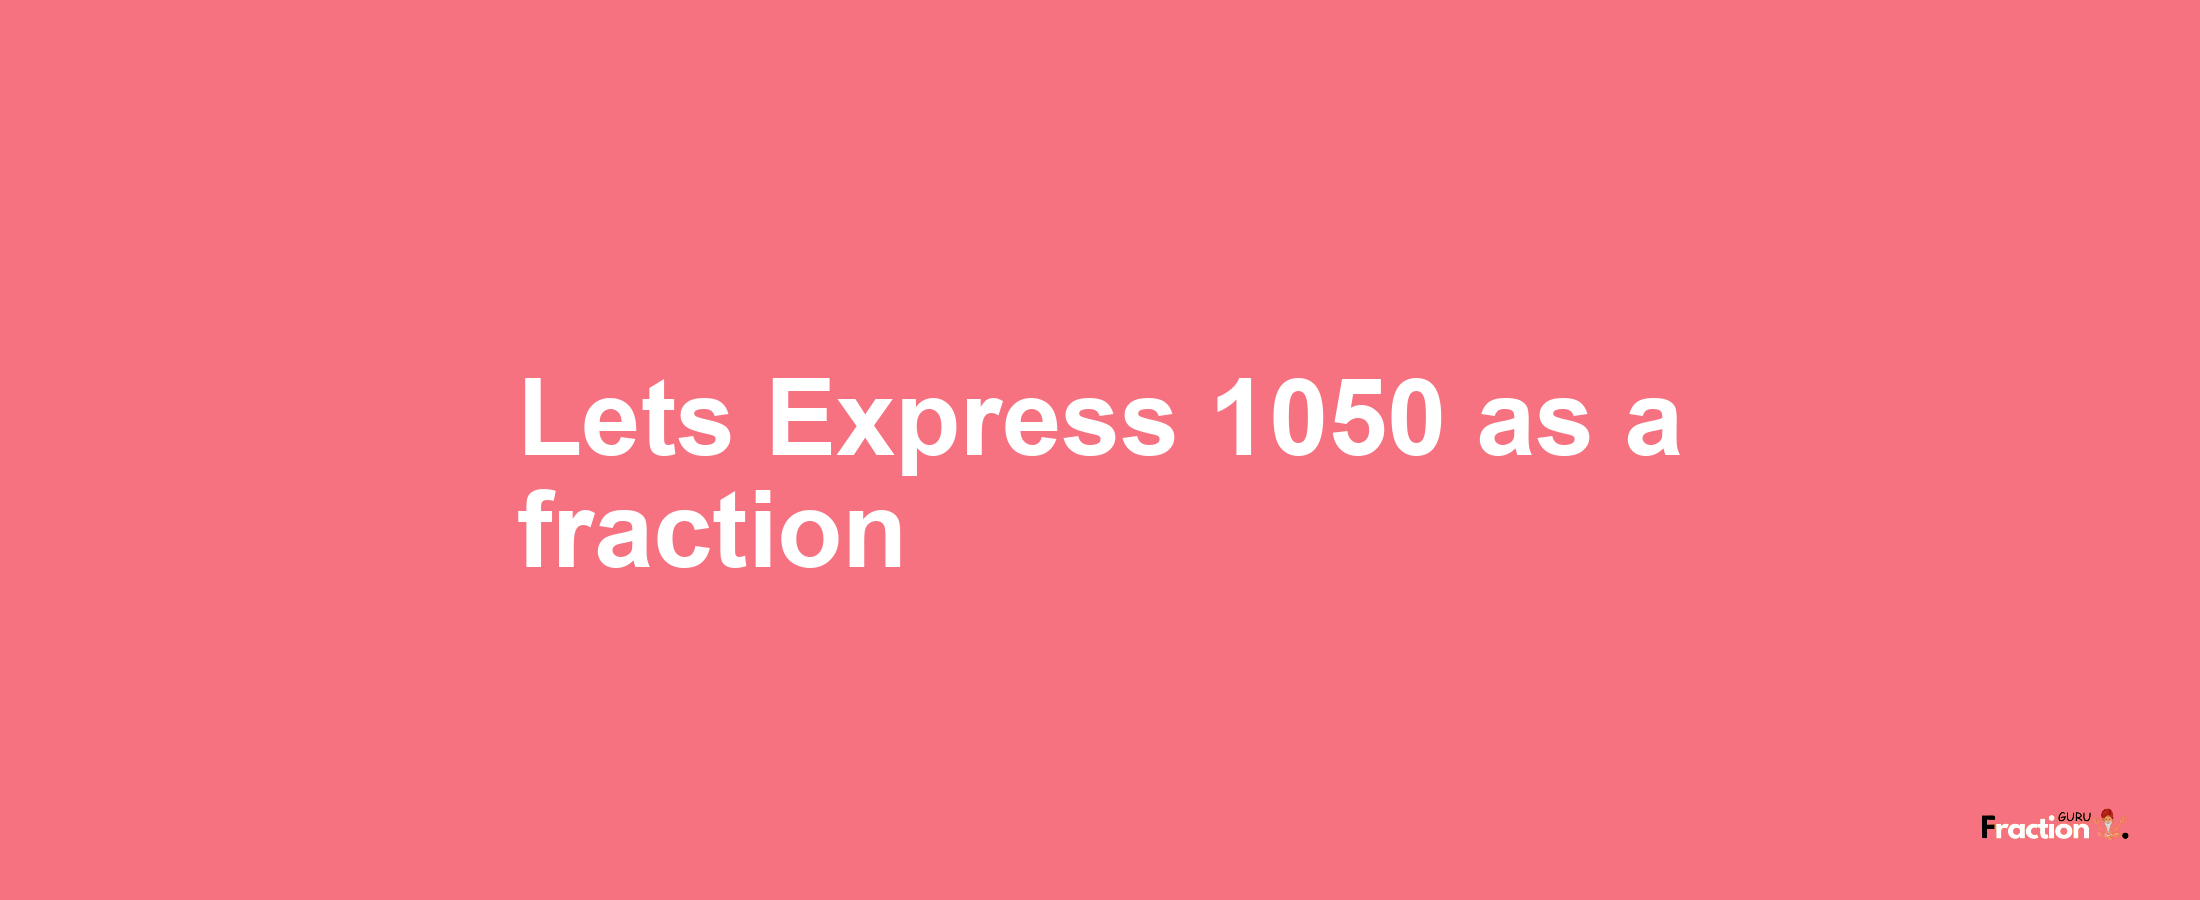 Lets Express 1050 as afraction